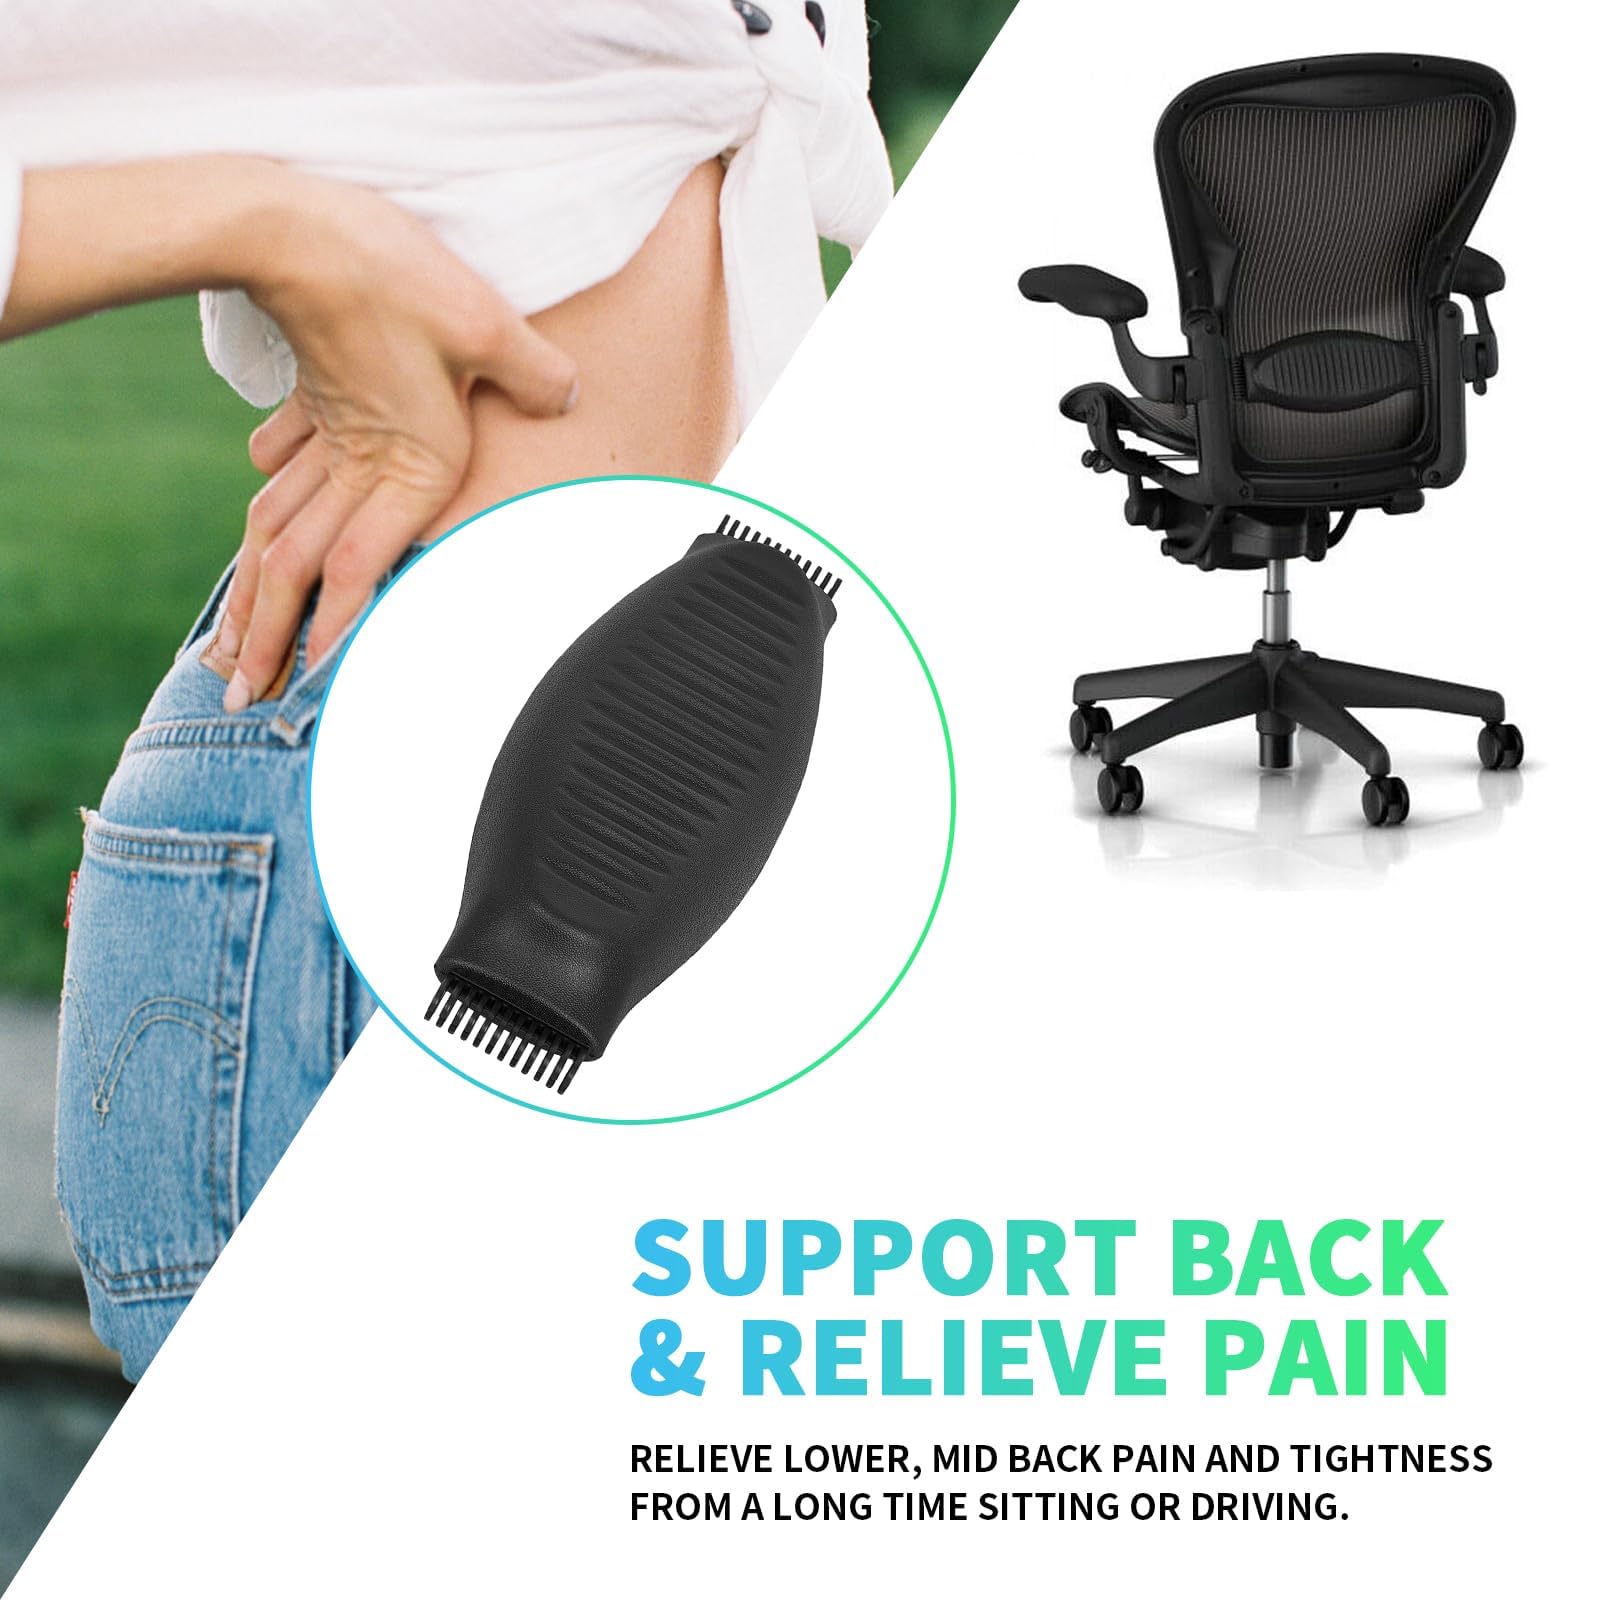 ECOTRIC Lumbar Support Pad Compatible with Herman Miller Classic Aeron Chair Size B, Home Office Seating Support Pad - Graphite/Black